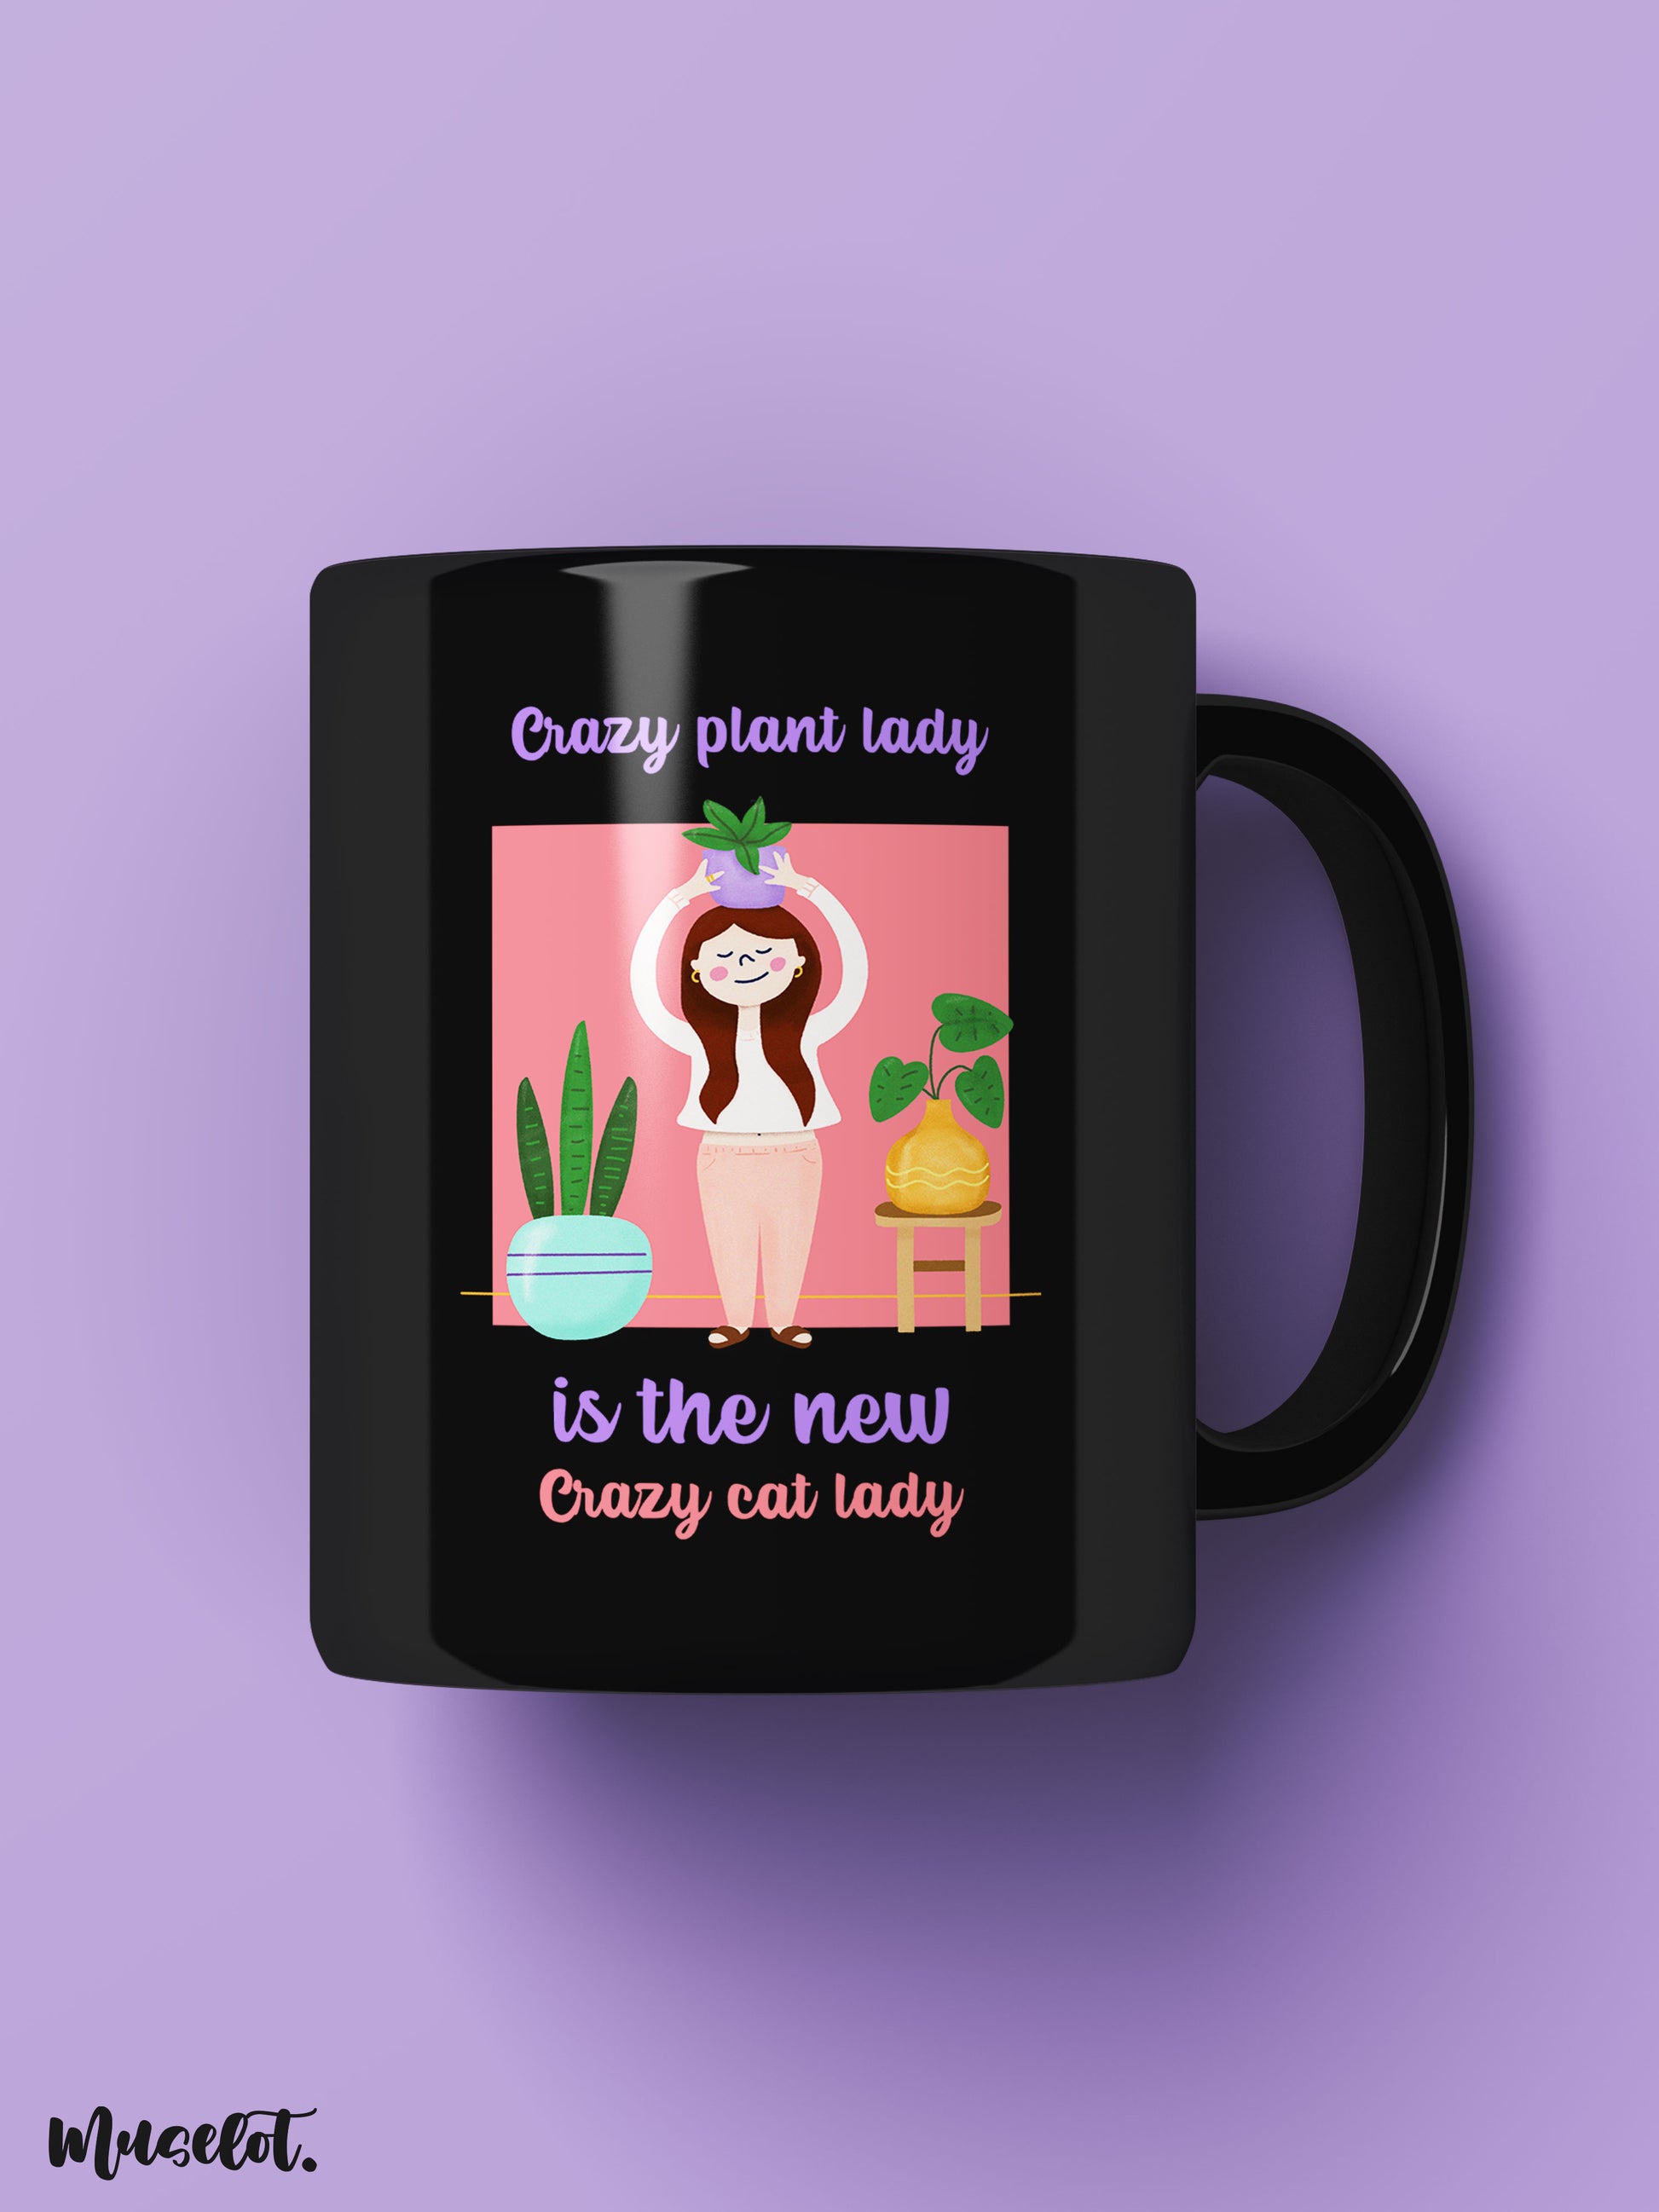 Crazy plant lady is the new crazy cat lady design illustrated black printed mugs at Muselot